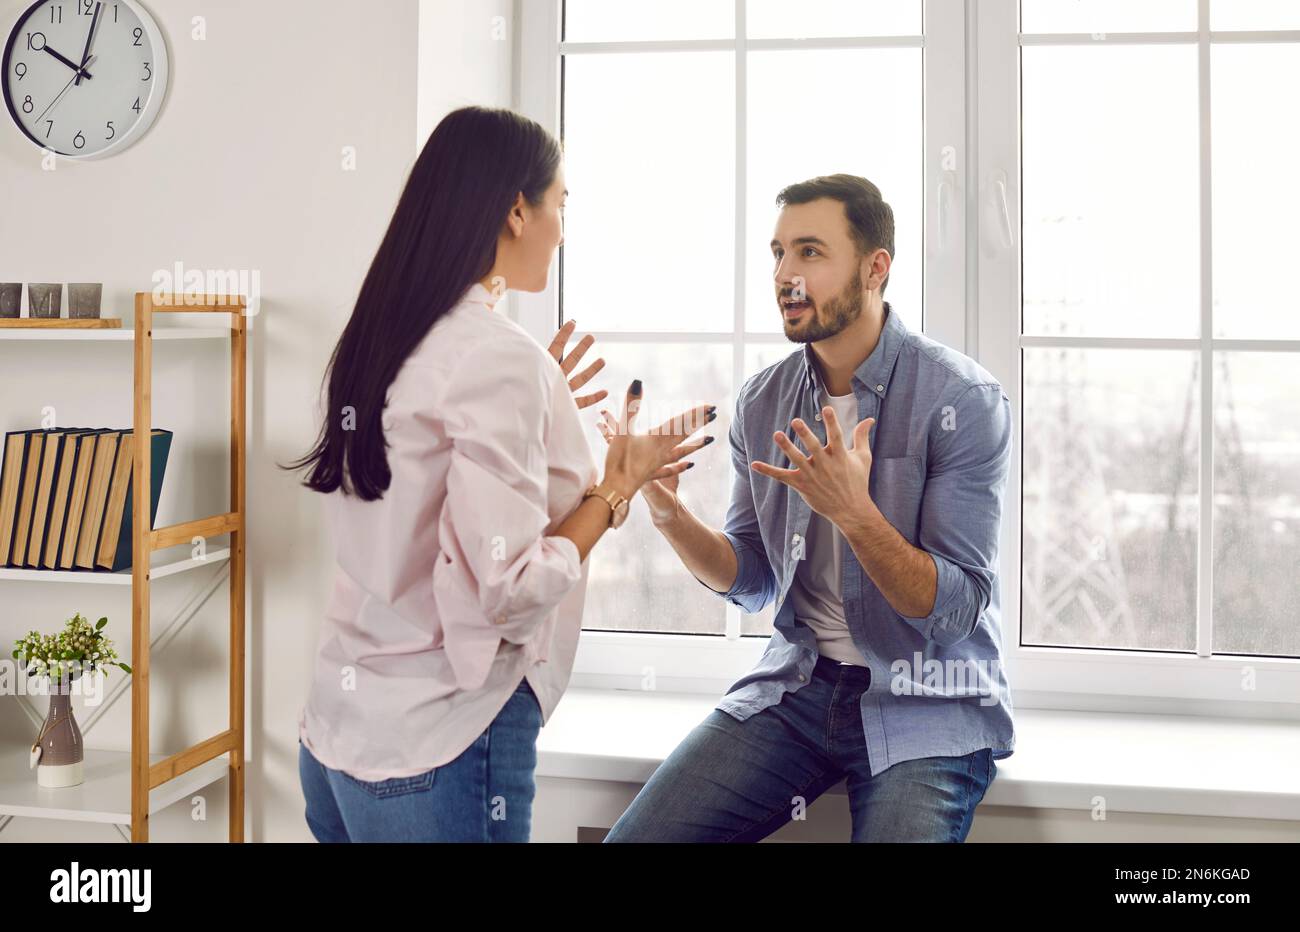 Young family couple having a disagreement, quarreling, and shouting at each other Stock Photo